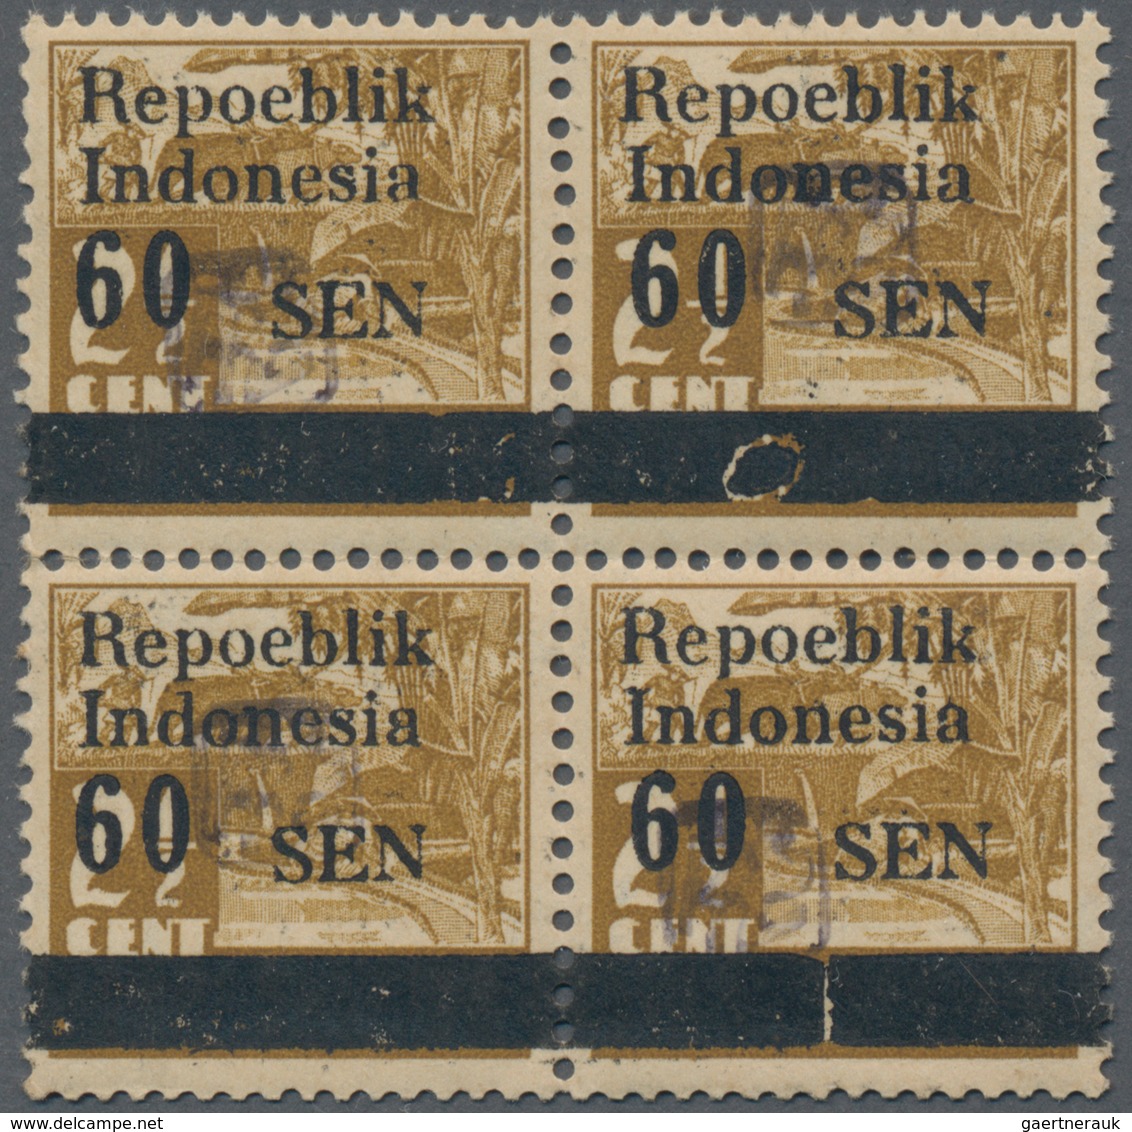 Indonesien - Lokalausgaben: 1945/50, very specialized collection on pages/stock cards in two large s